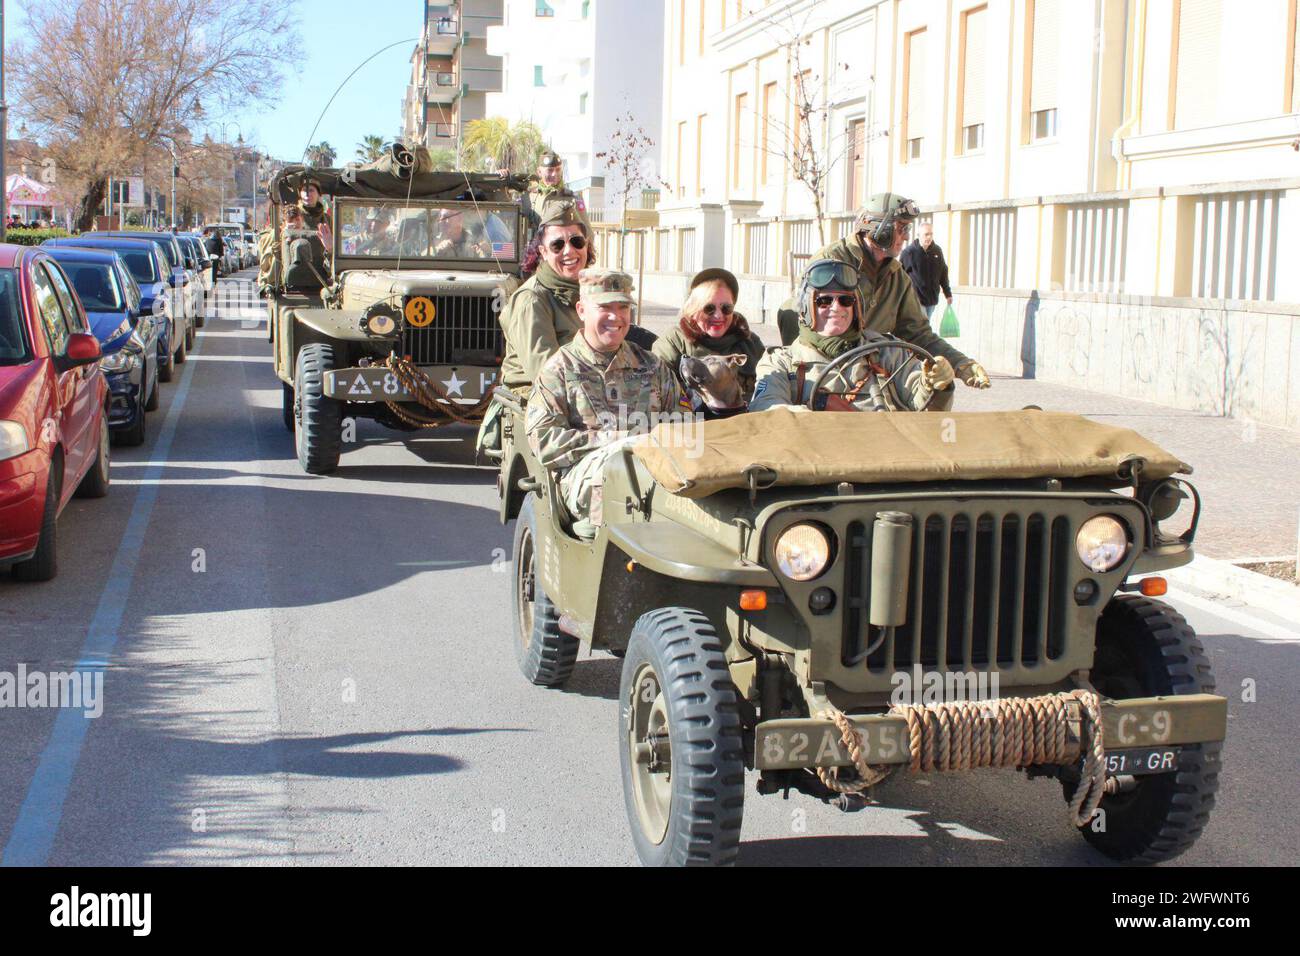 The 2nd Armored Brigade Combat Team, 1st Armored Division, command team Col. Dwight D. Domengeaux and Command Sgt. Maj. Jesus H. Peńa, participate in a military procession through the city of Nettuno honoring the legacy of the soldiers who fought on the beachhead of Anzio-Nettuno, Italy on Jan. 21, 2024. The 2nd Armored Brigade Combat Team, 1st Armored Division then known as Combat Command Bravo, participated in the Allied landing on X-Ray Beach in Nettuno on Jan. 22, 1944. Stock Photo